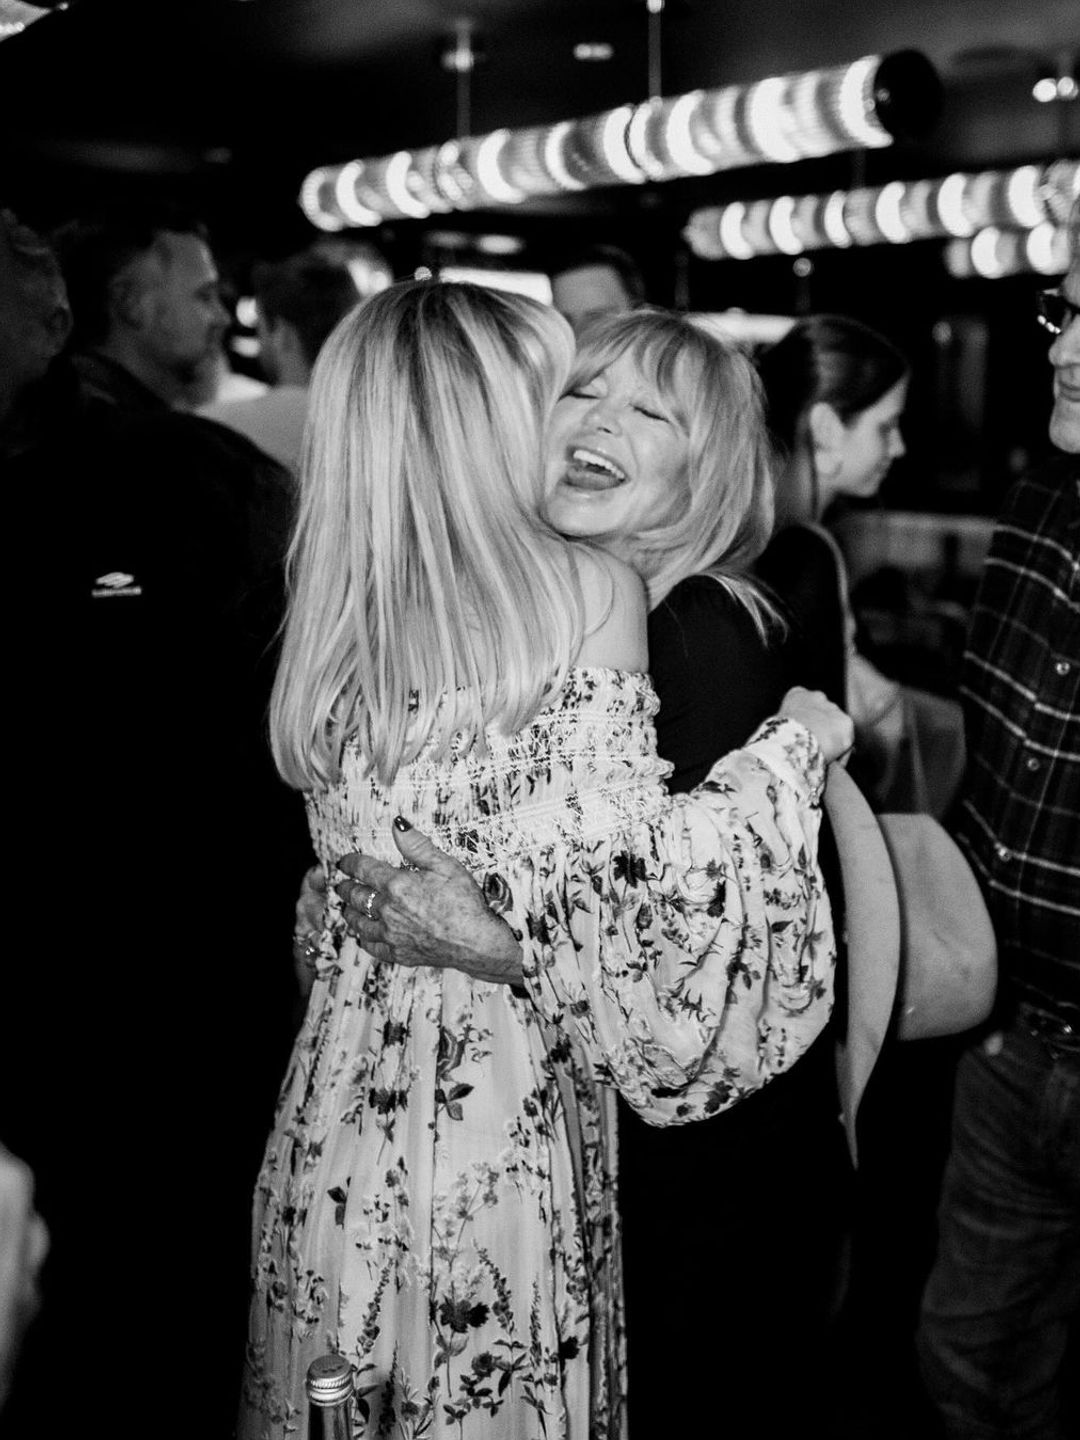 Kate Hudson shares a Mother's Day tribute to Goldie Hawn